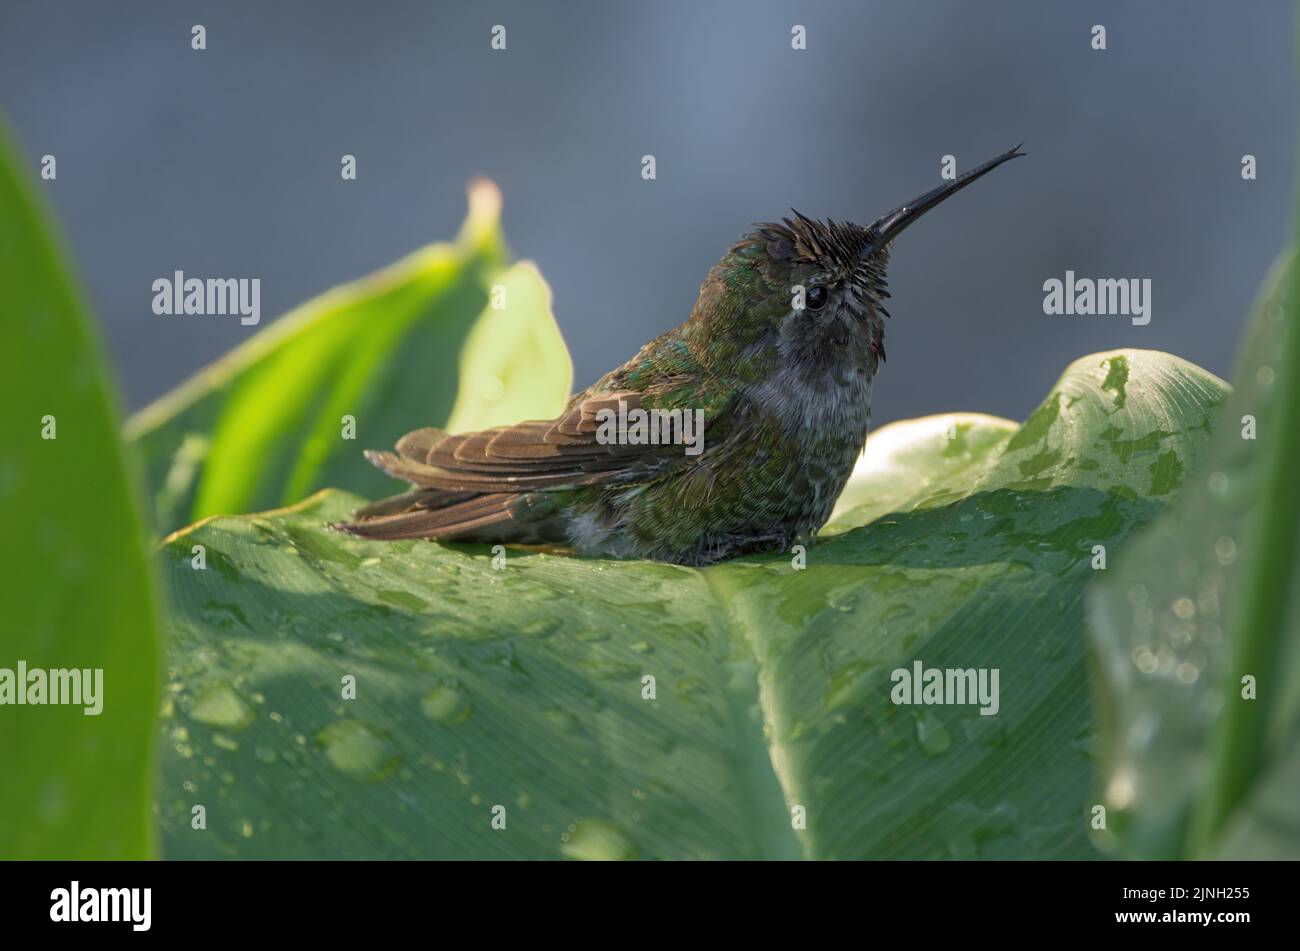 Young male Anna's hummingbird, Calypte anna, shown taking a bath among wet leaves. Stock Photo